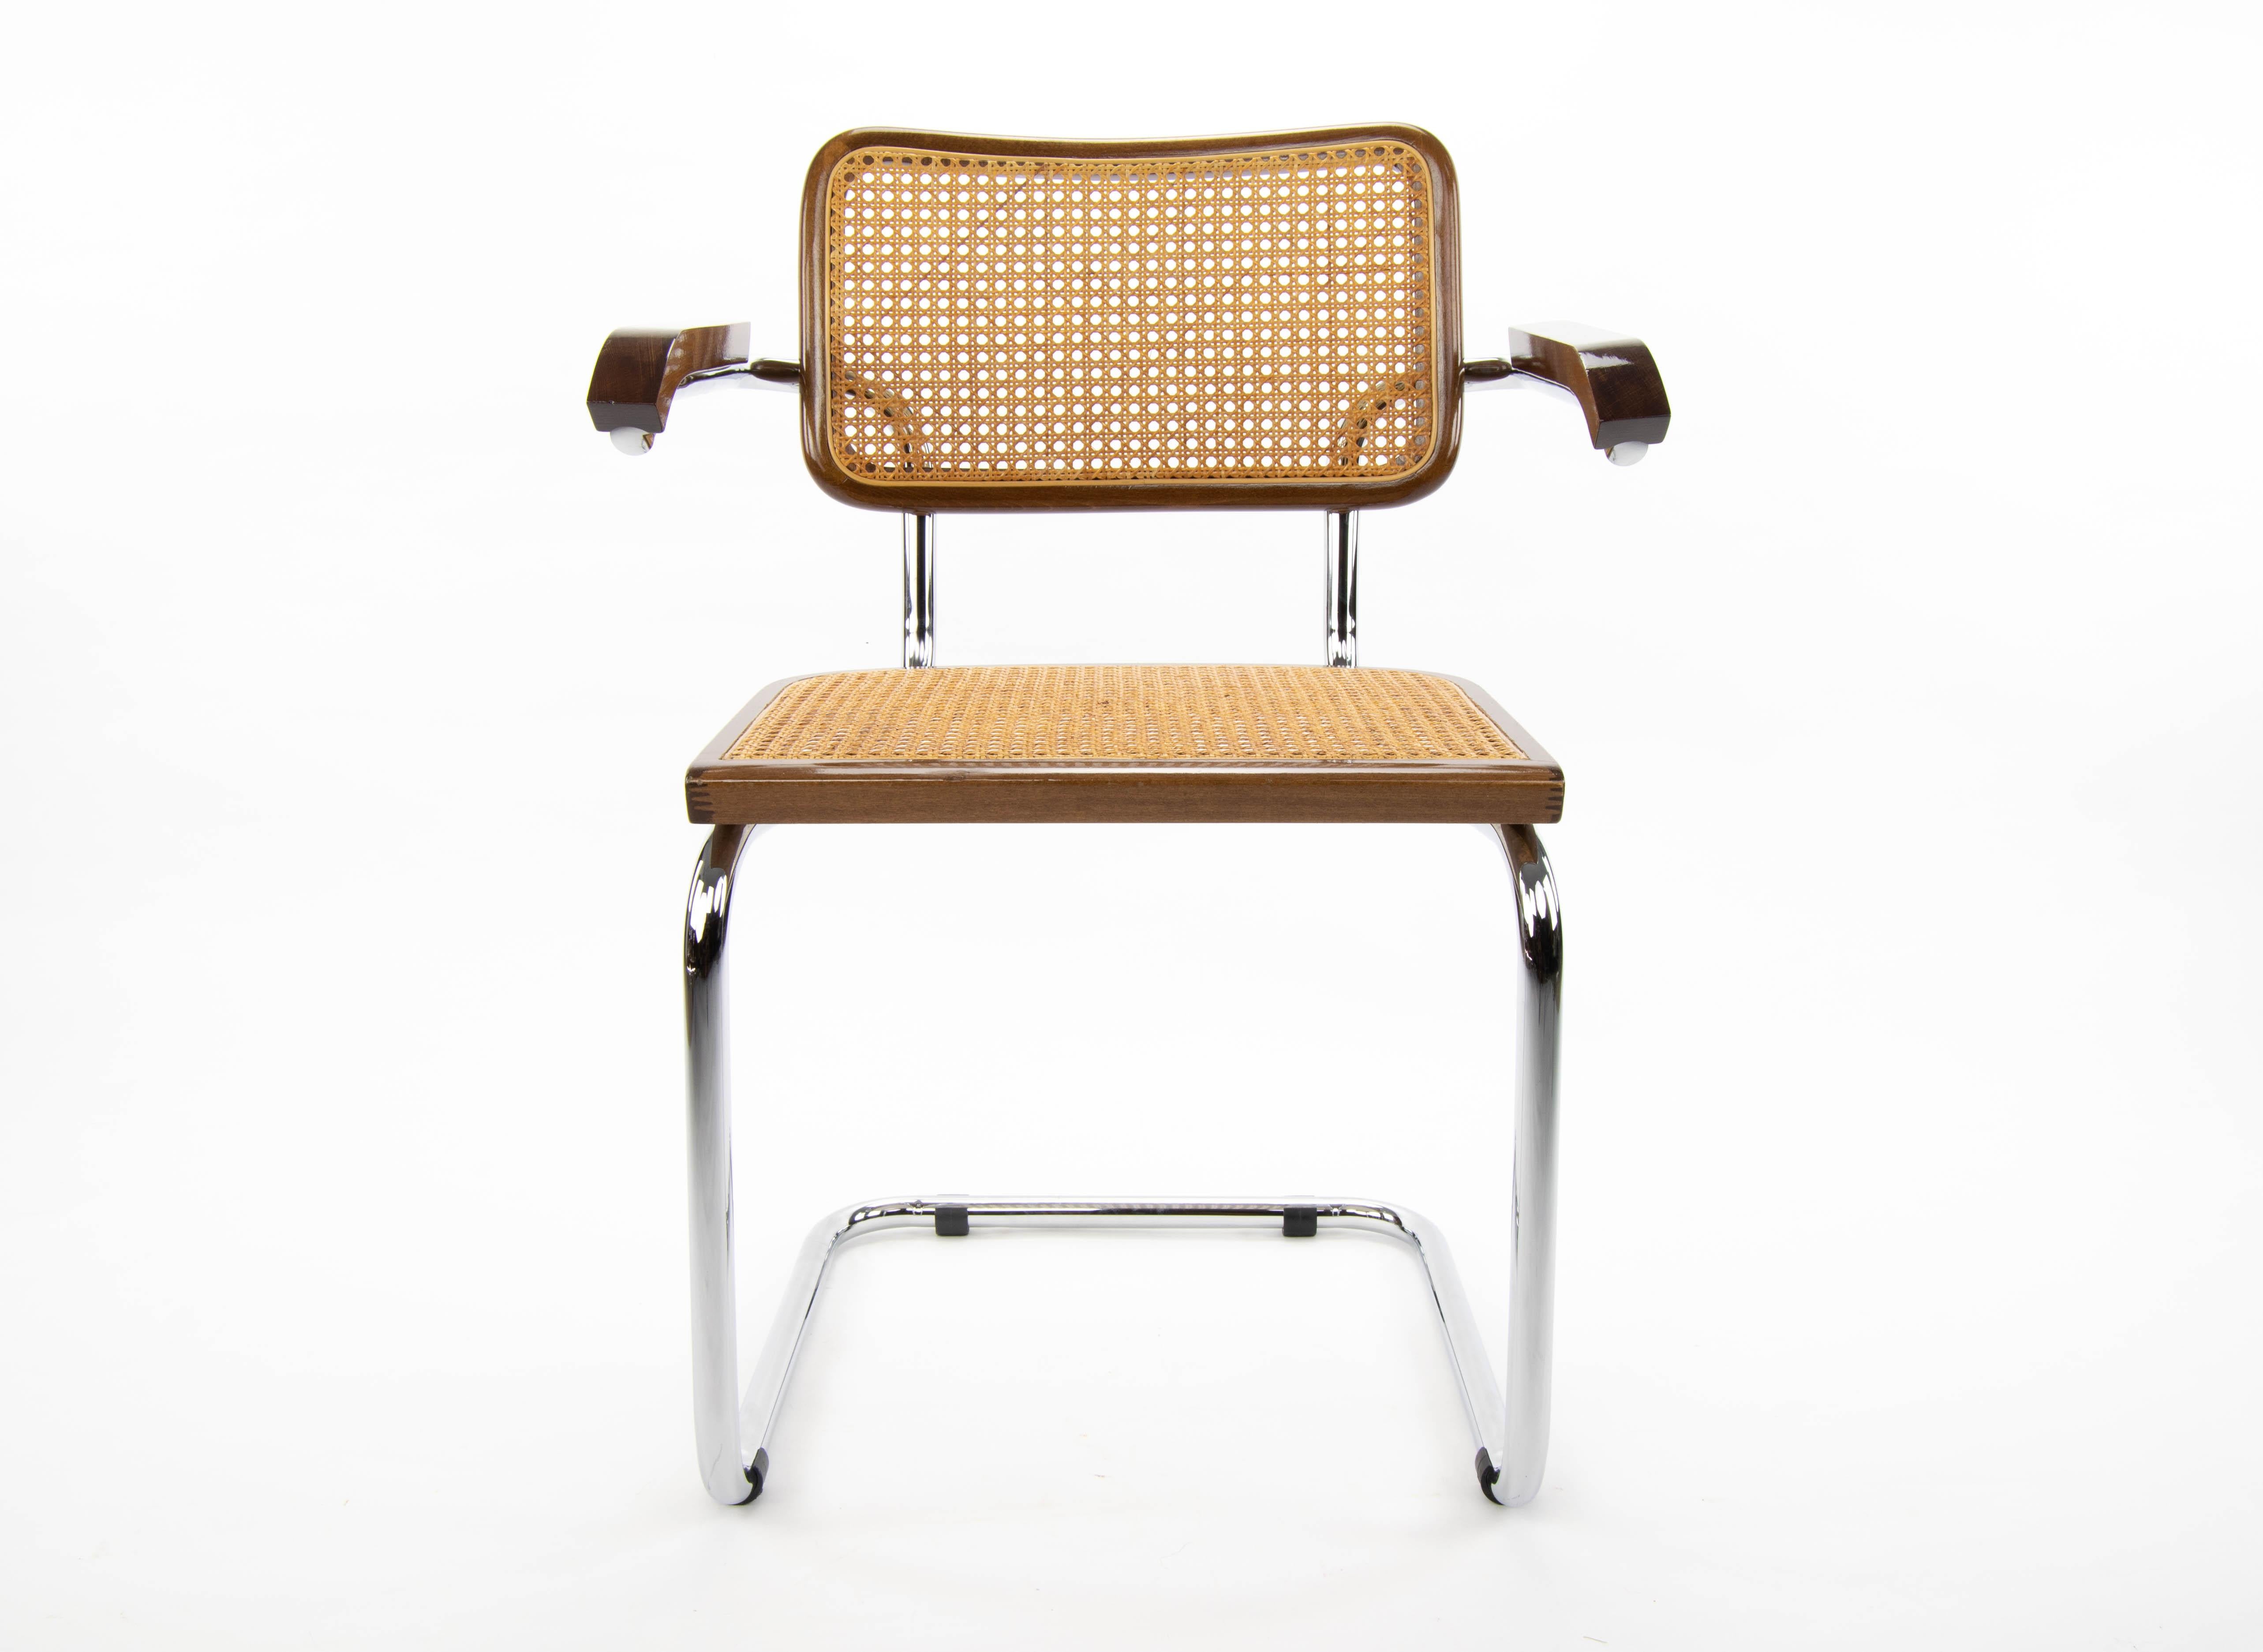 Late 20th Century Mid-Century Modern Chrome and Walnut Chairs by Marcel Breuer, Italy, 1970s